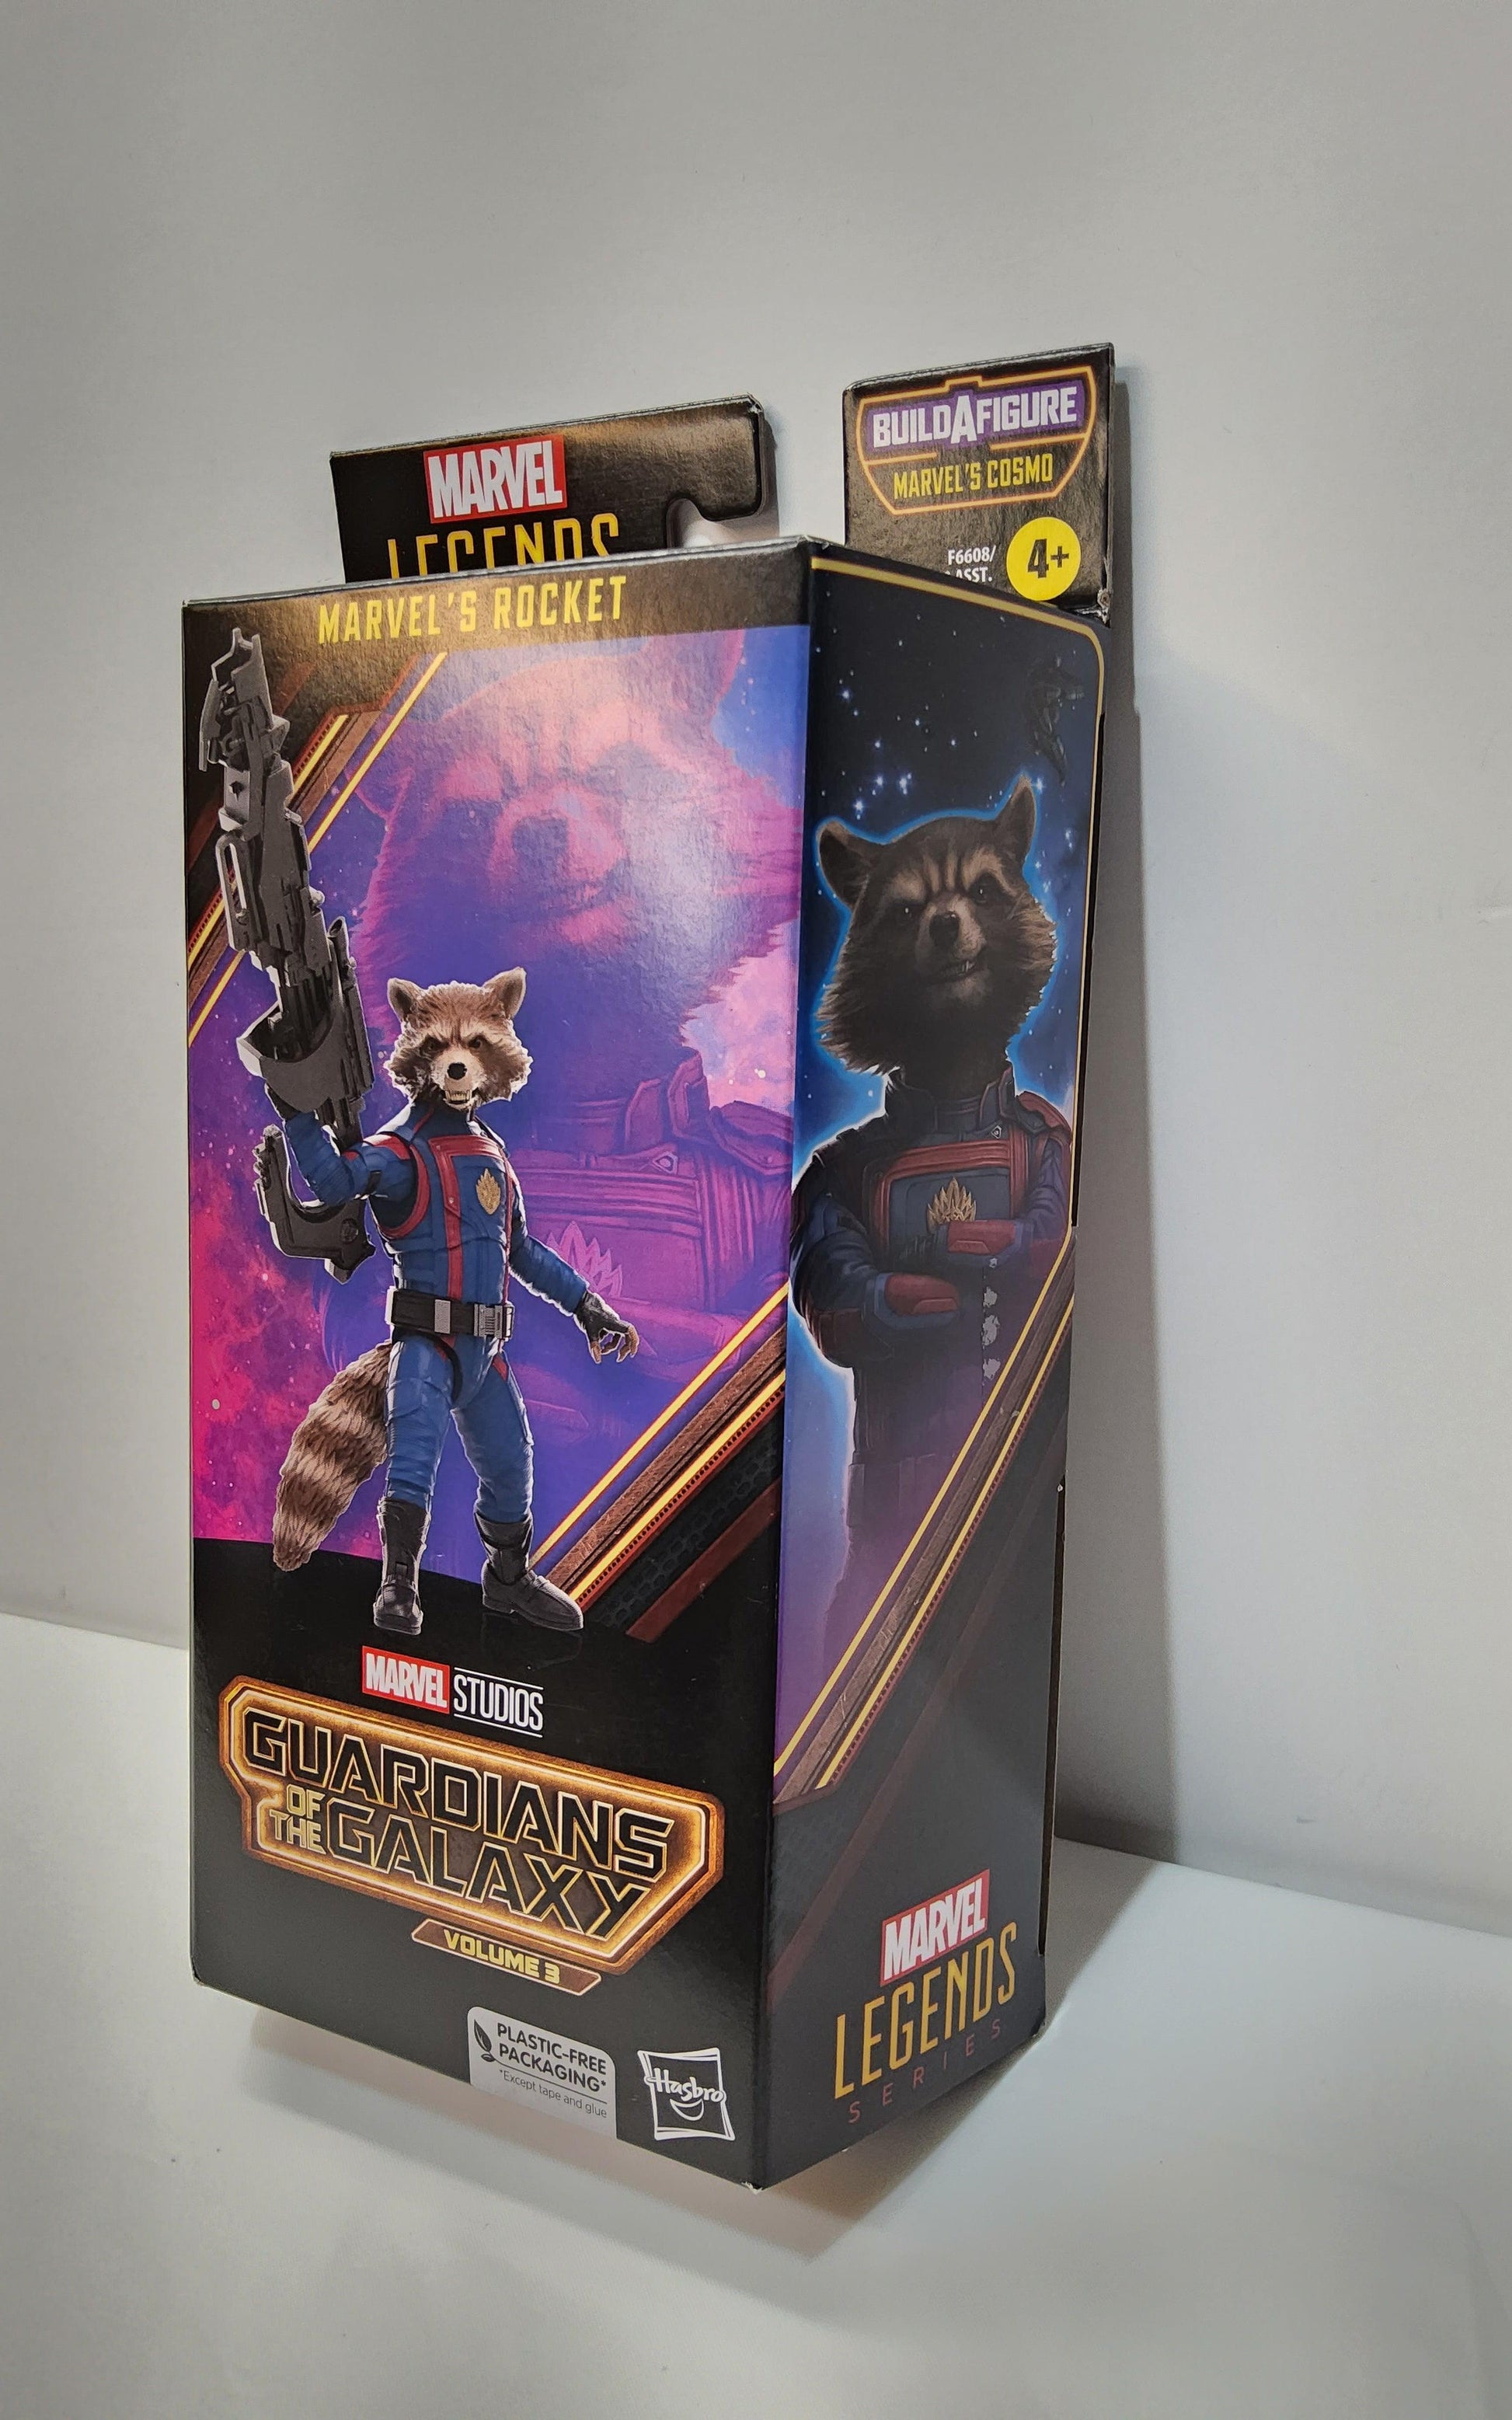 Hasbro Marvel Legends Rocket & Weapon Cosmo Build a Figure Guardians of the Galaxy 3 - Logan's Toy Chest